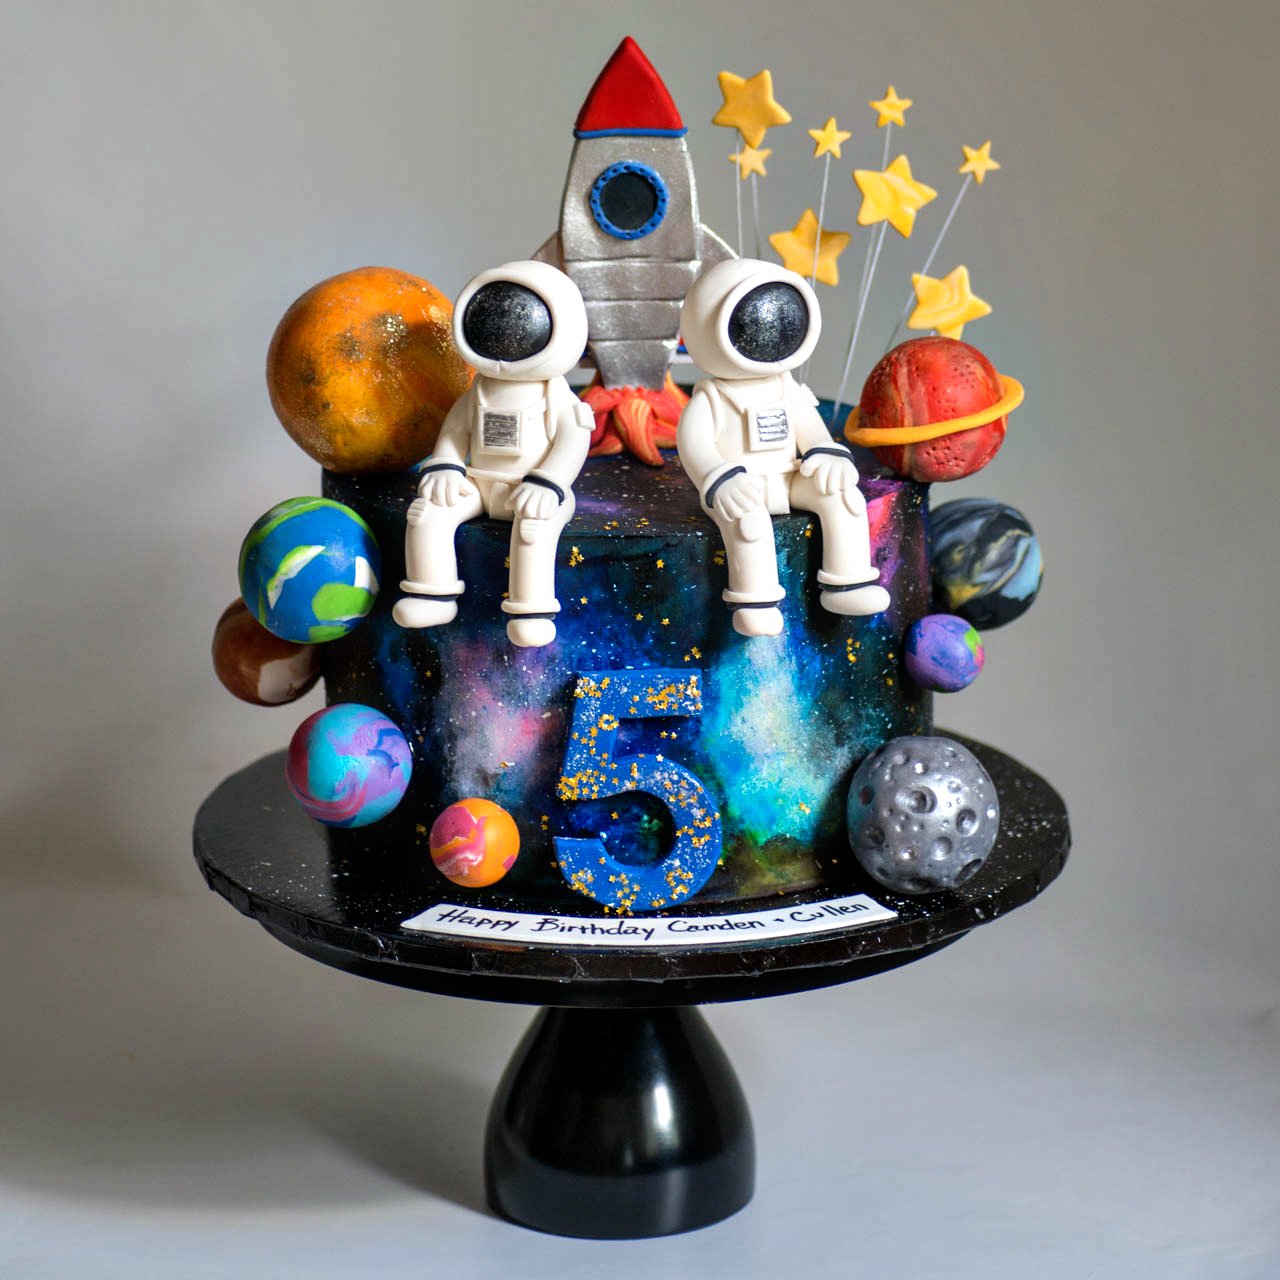 Astronauts Outer Space Birthday Cake 